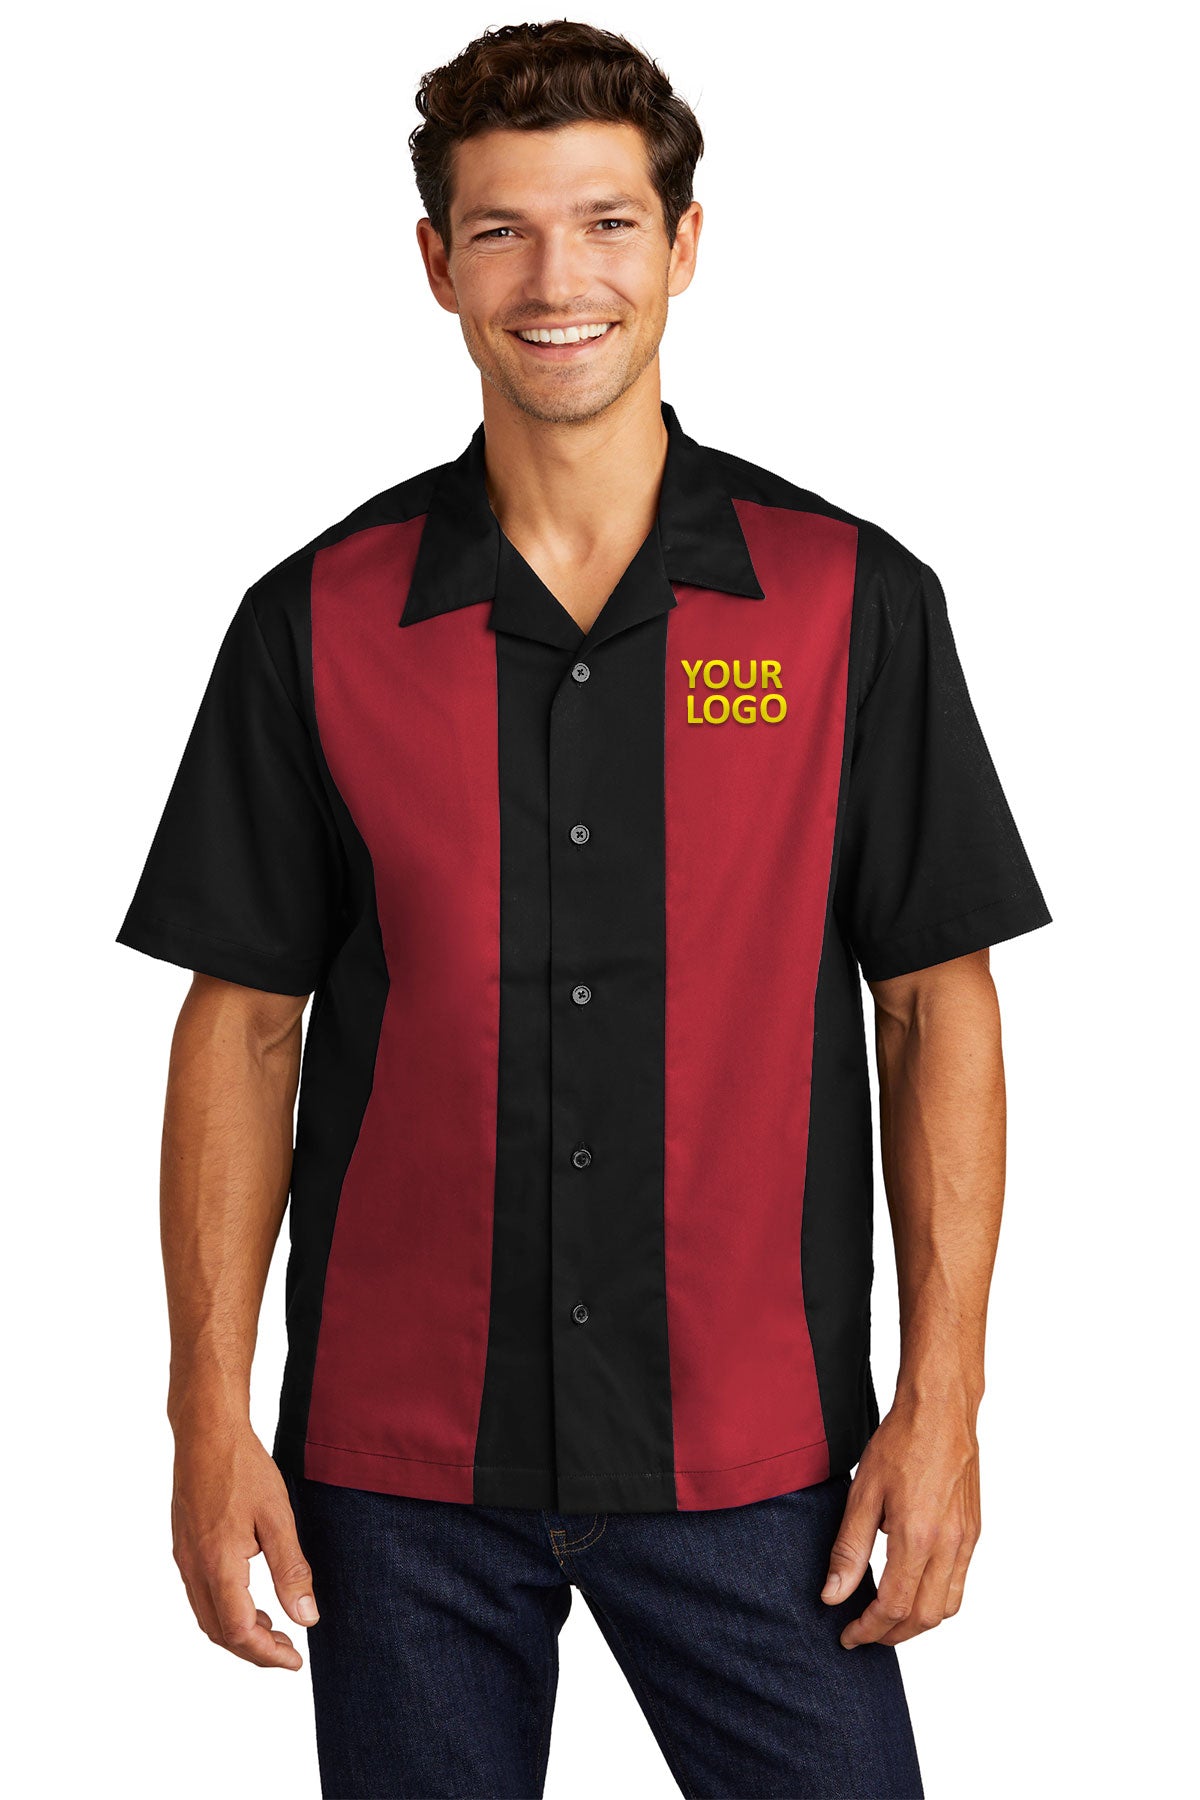 Port Authority Black/Red S300 work shirts with logo